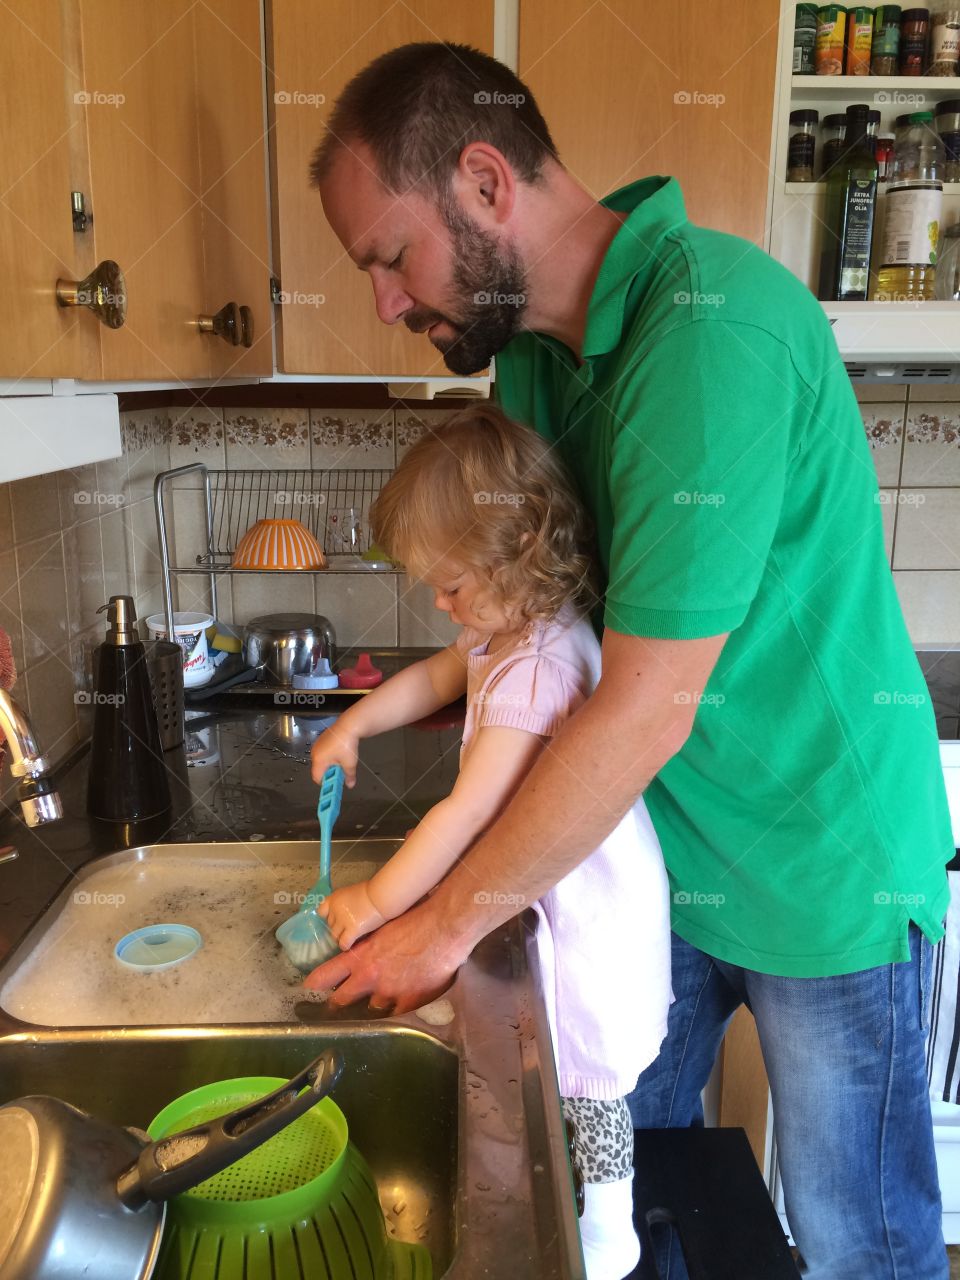 Daughter helping father in house work